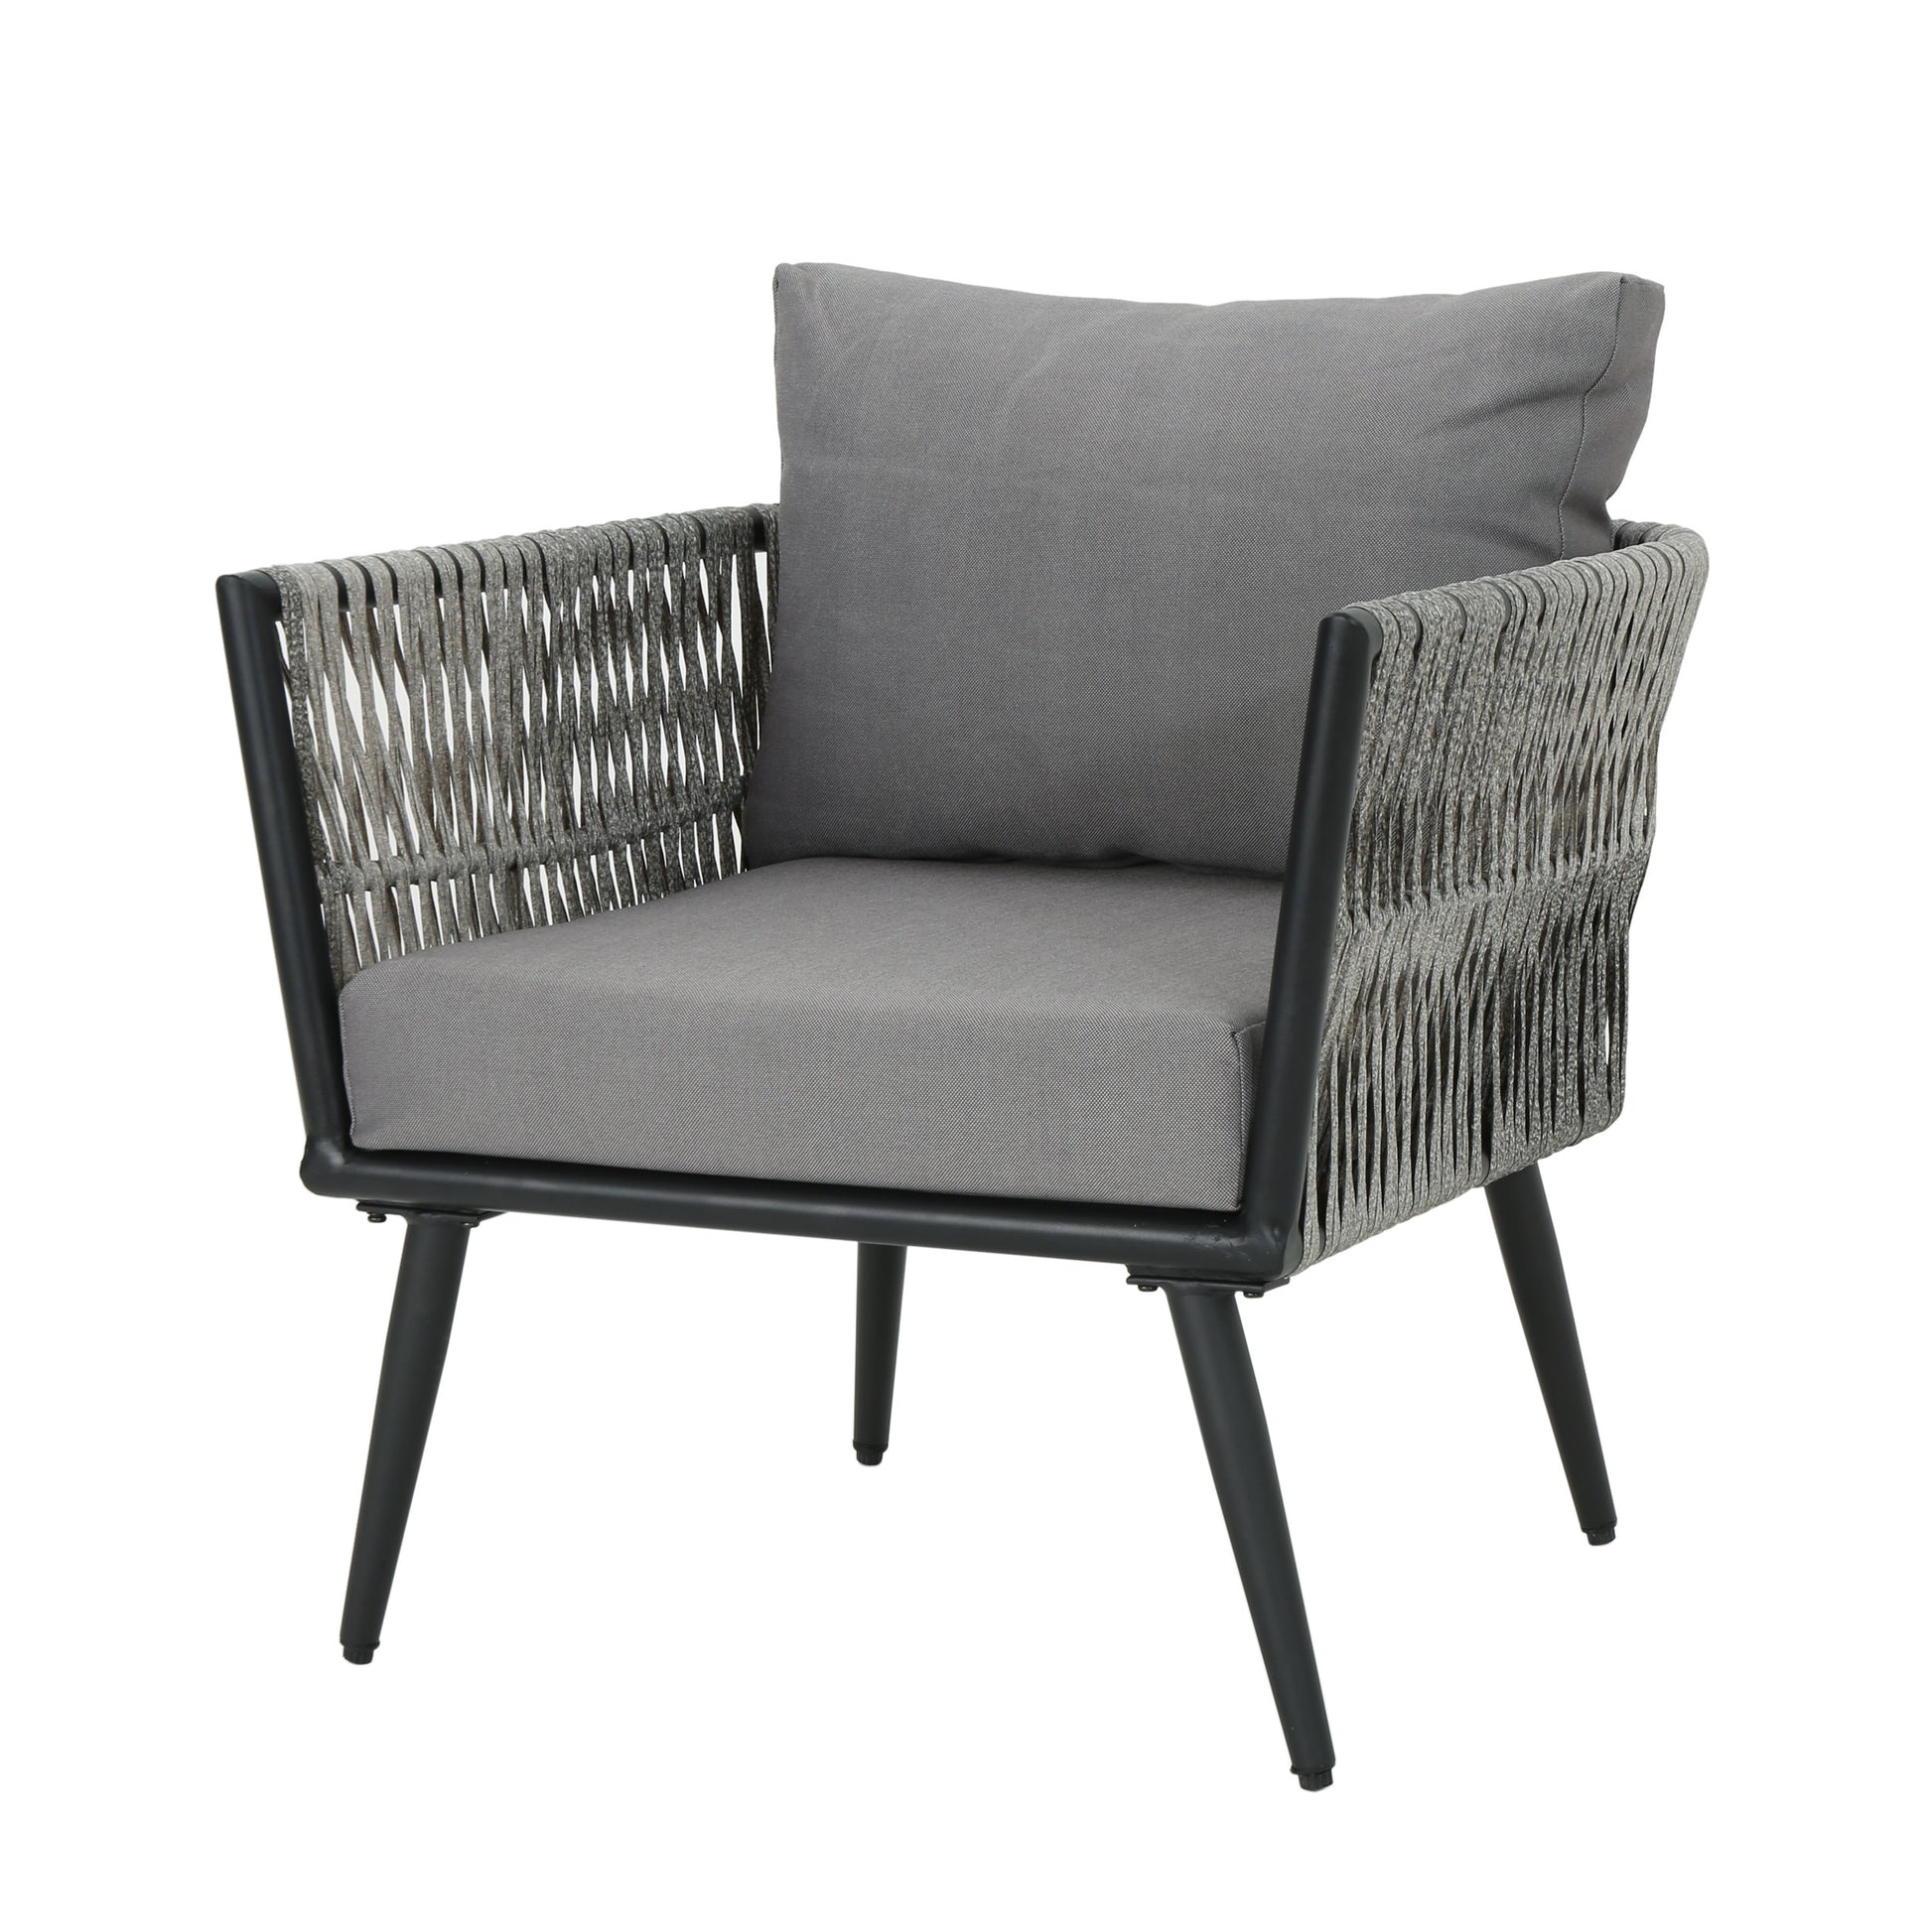 Shipley Outdoor Wicker and Aluminum Club Chair – GDFStudio